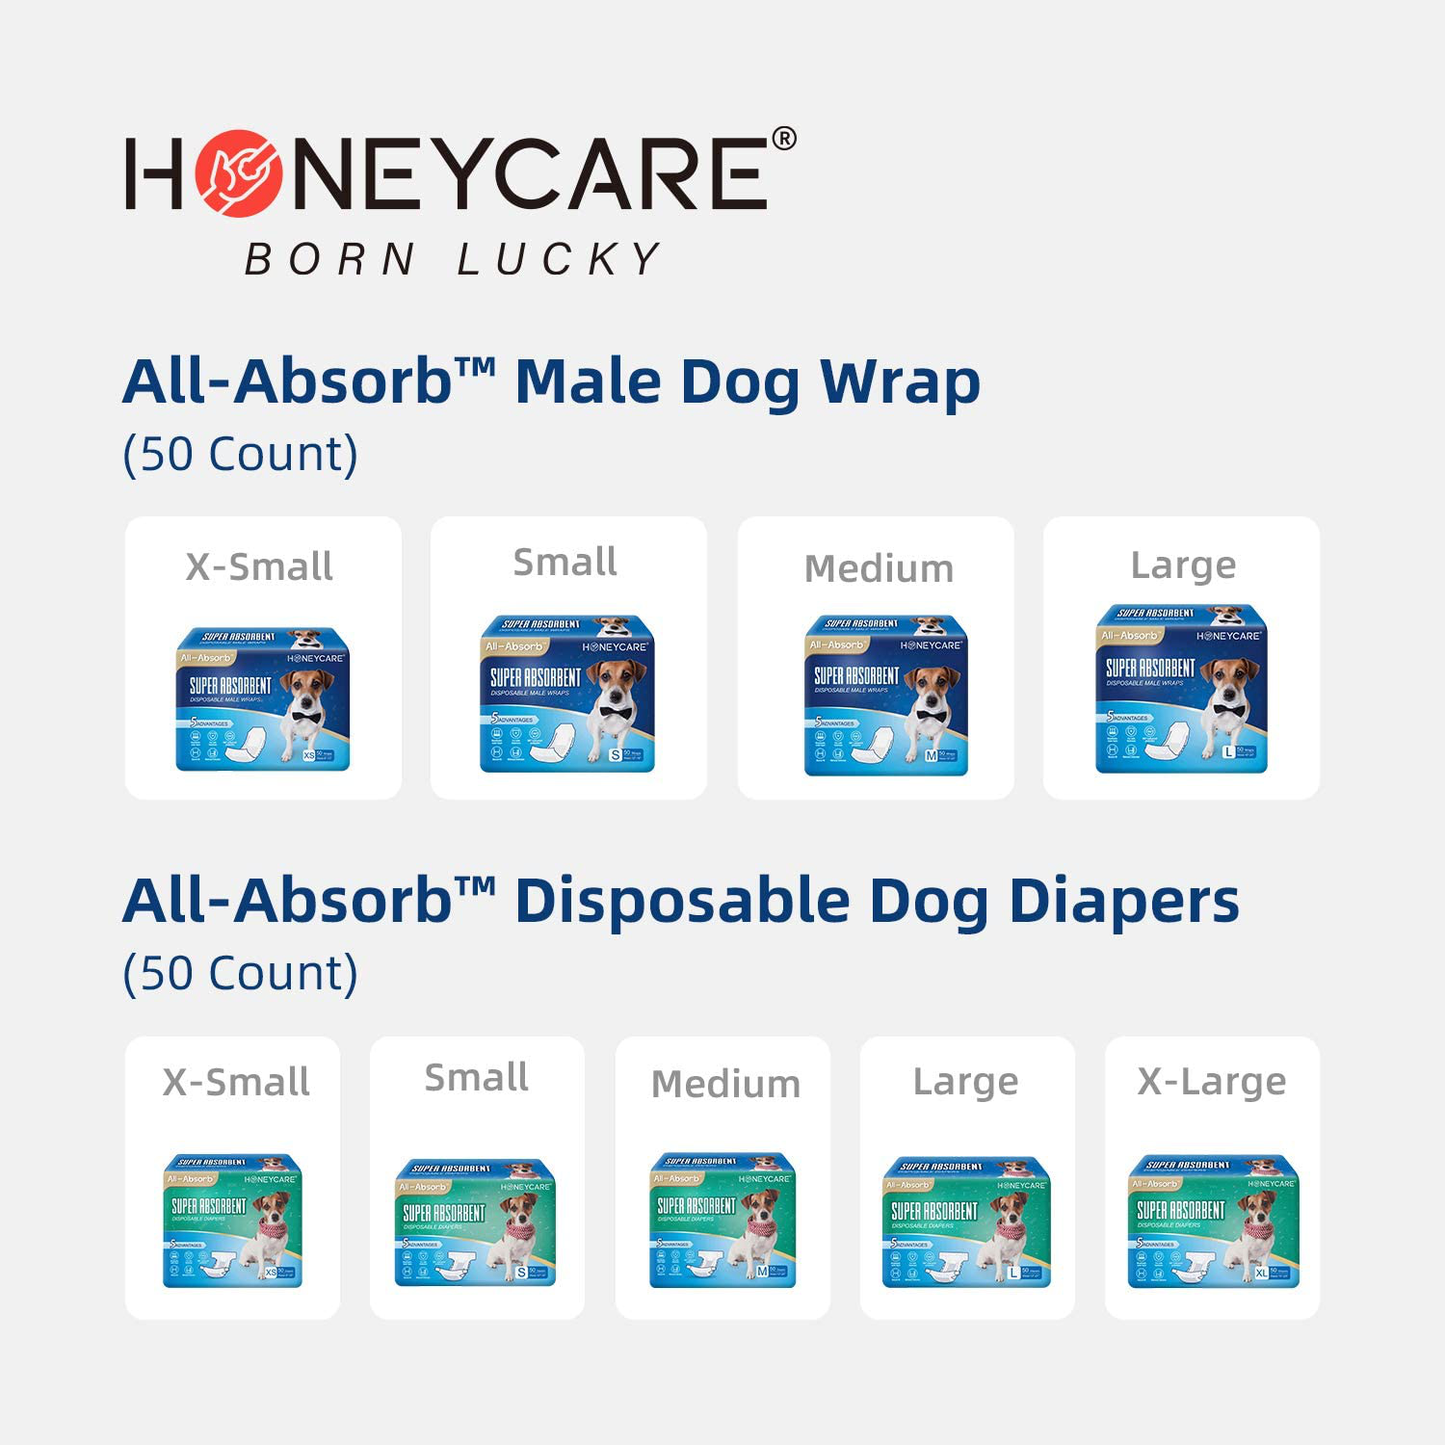 All-Absorb A27 Male Dog Wrap, 50 Count, X-Small